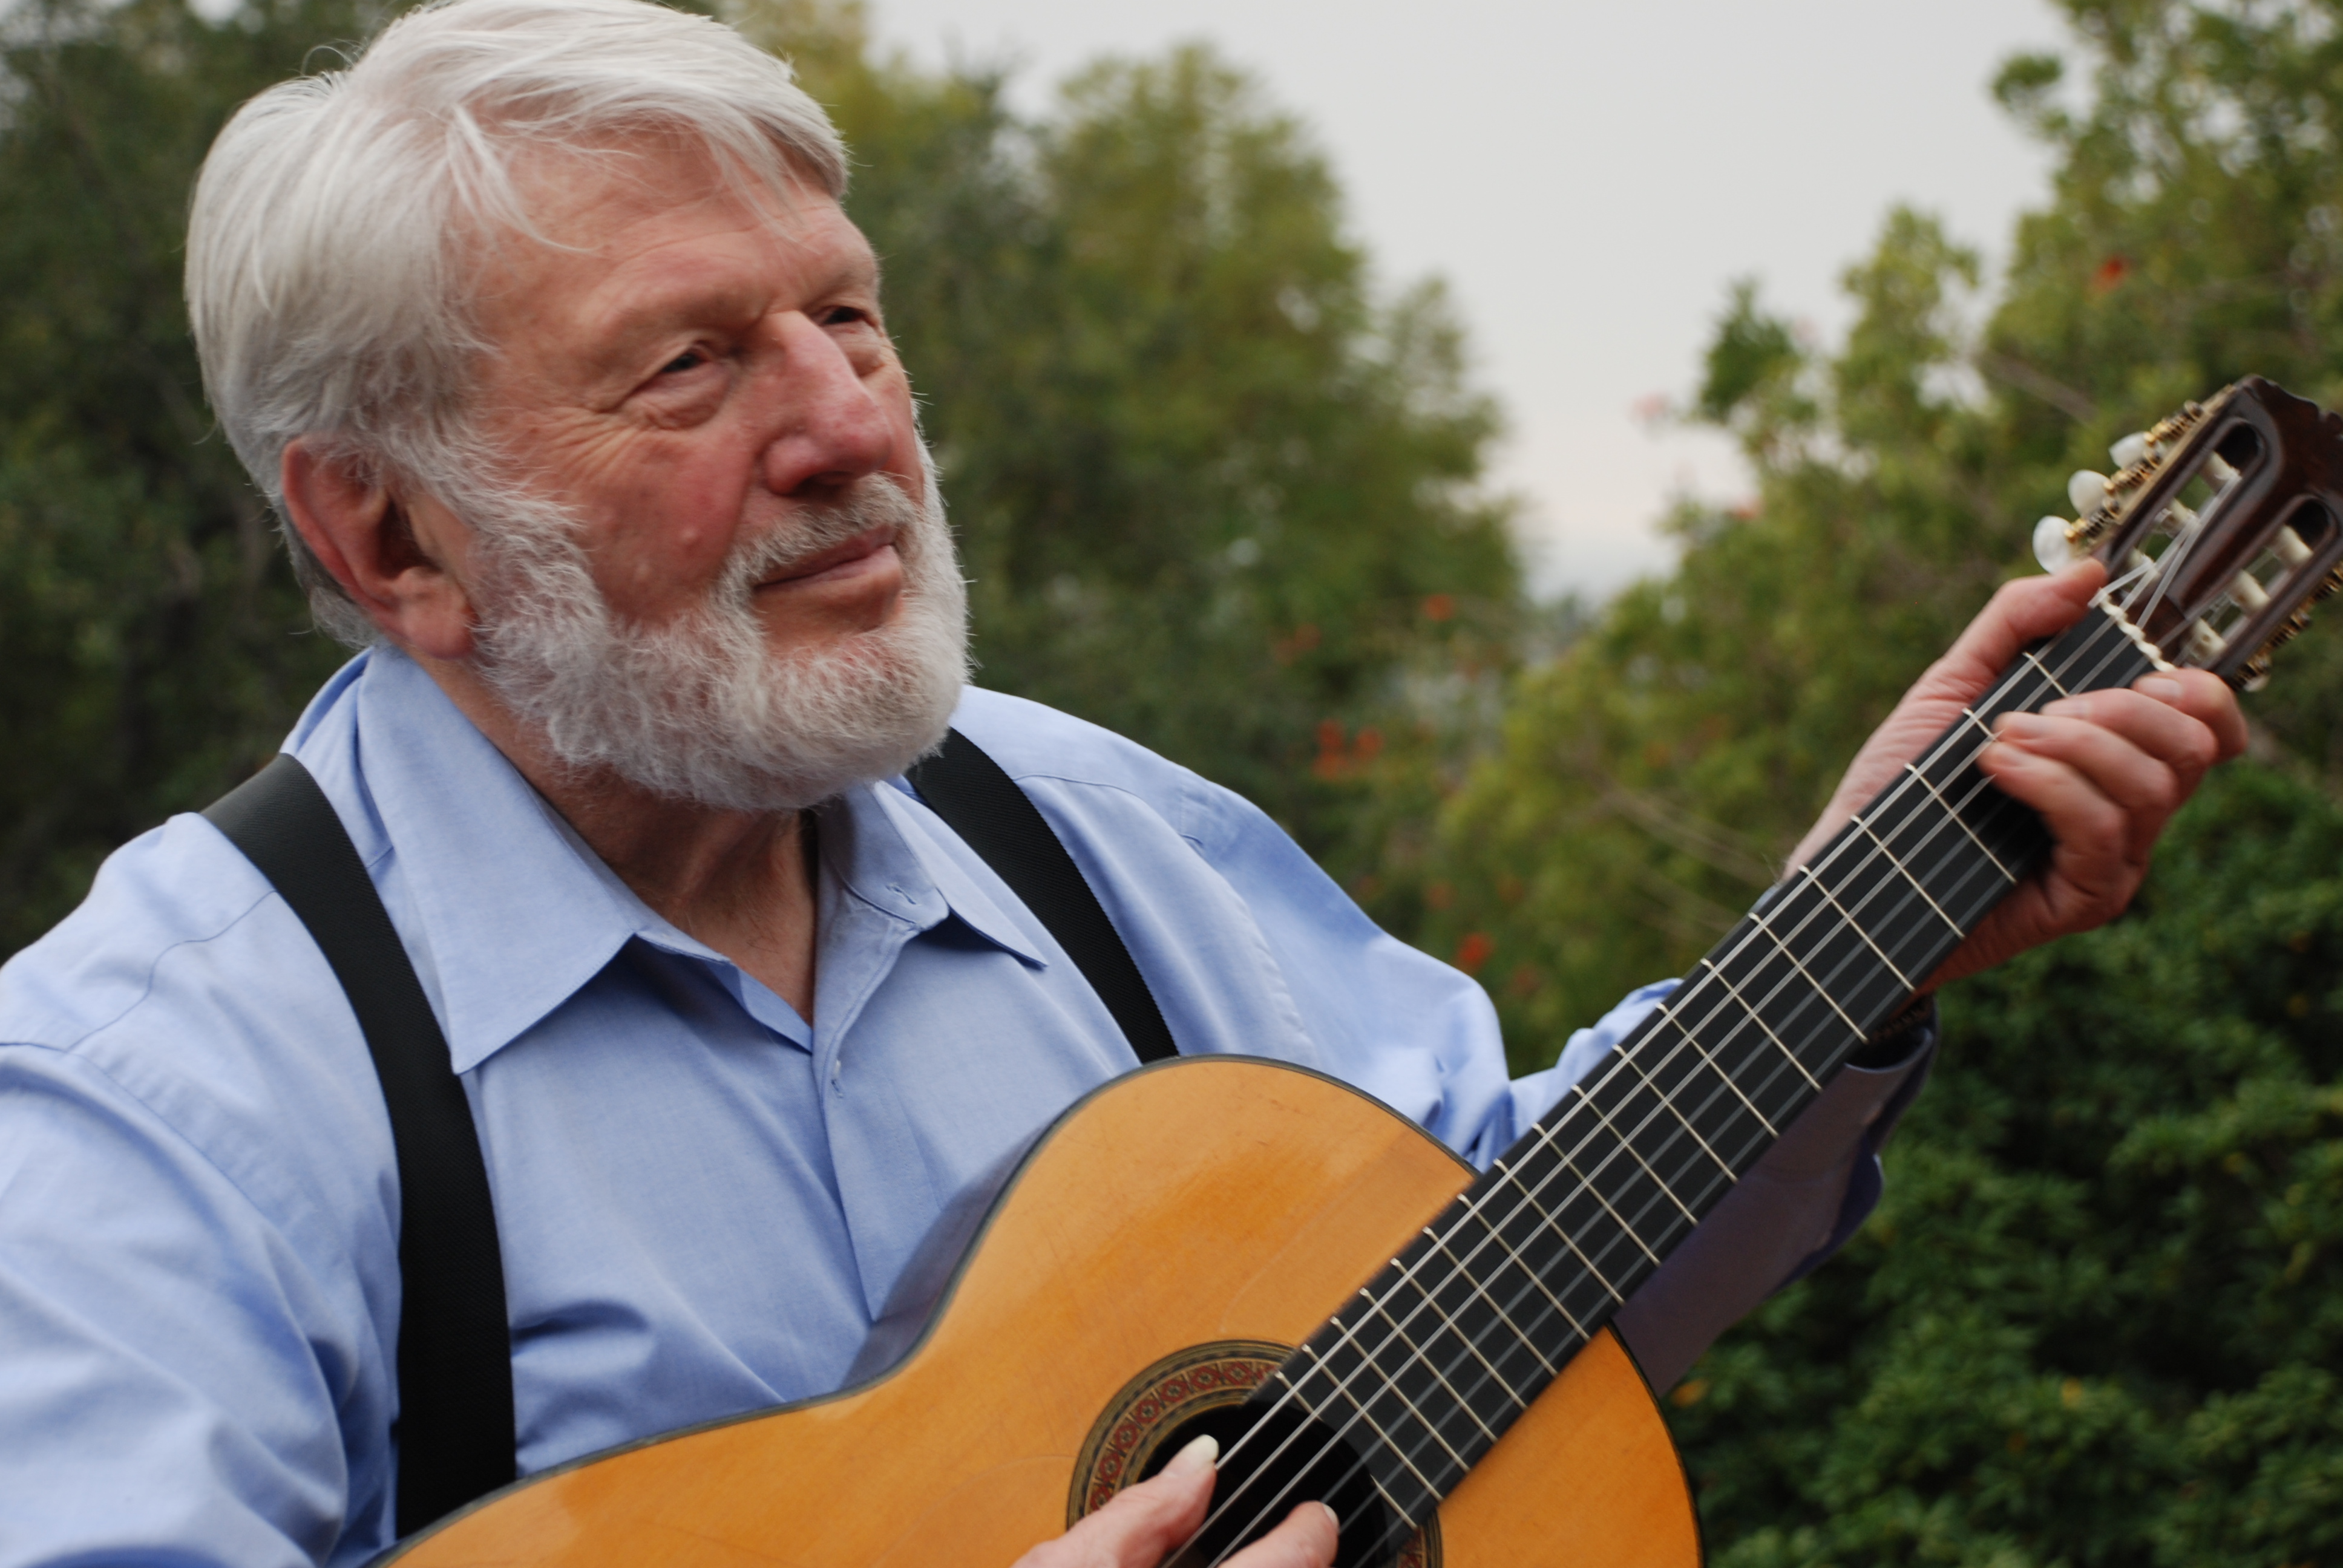 Theodore Bikel actor/activist/folksinger appears as himself in documentary, Journey 4 Artists